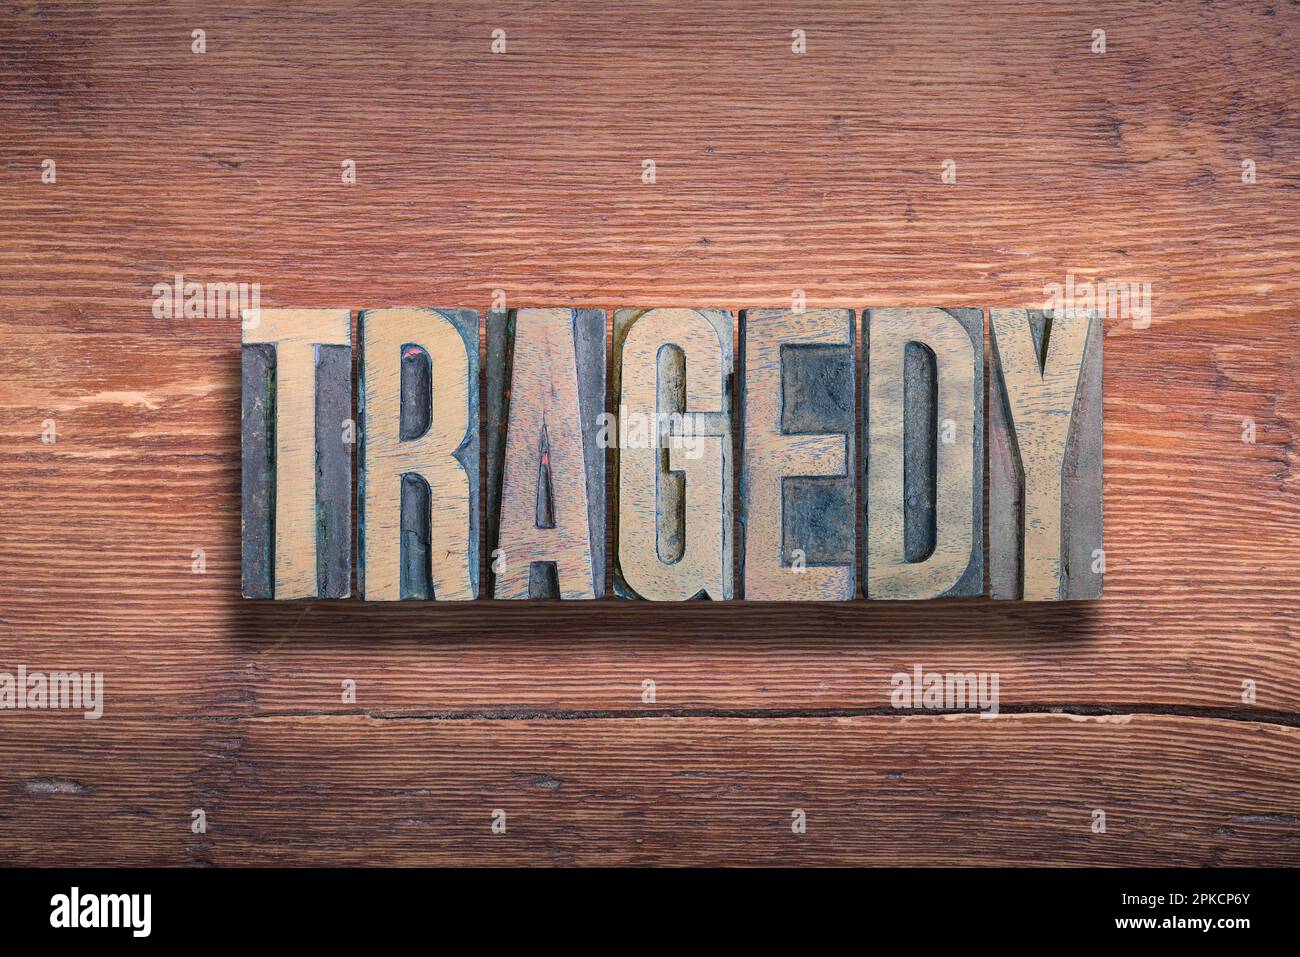 tragedy word combined on vintage varnished wooden surface Stock Photo